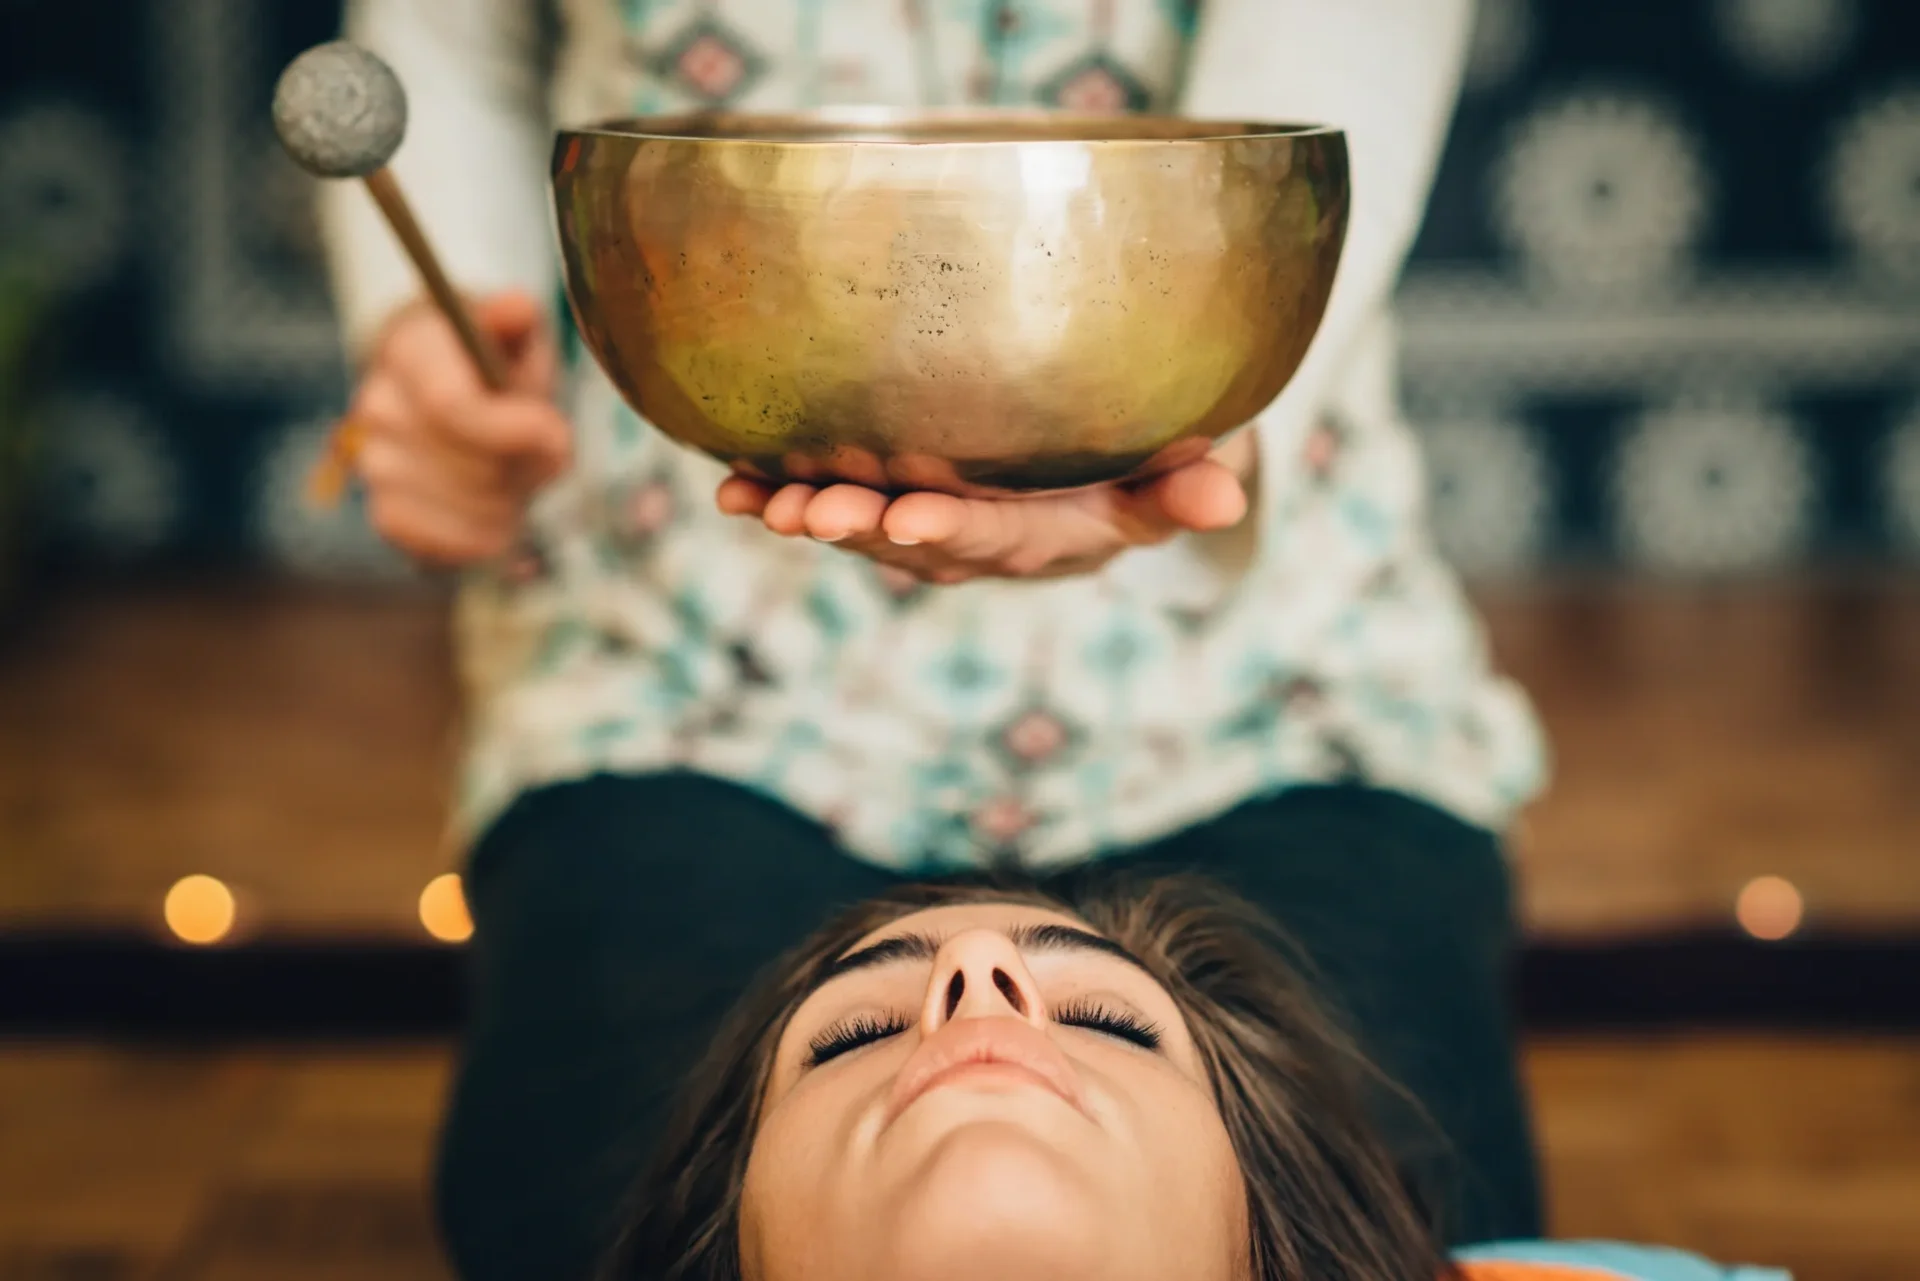 A woman is holding a singing bowl in her hands.